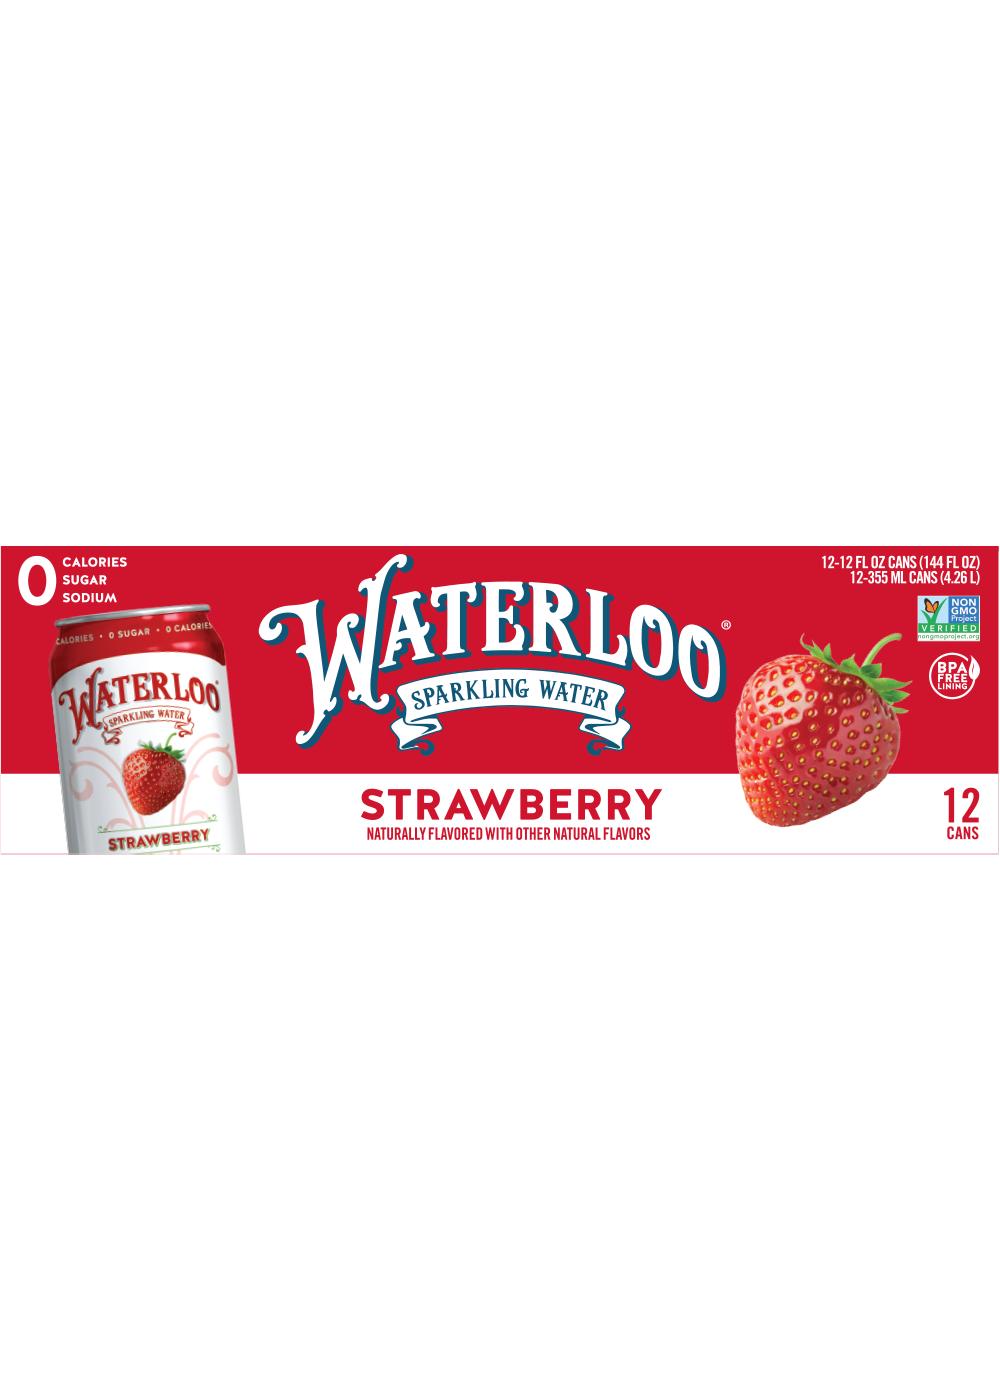 Waterloo Strawberry Sparkling Water 12 pk Cans; image 1 of 2